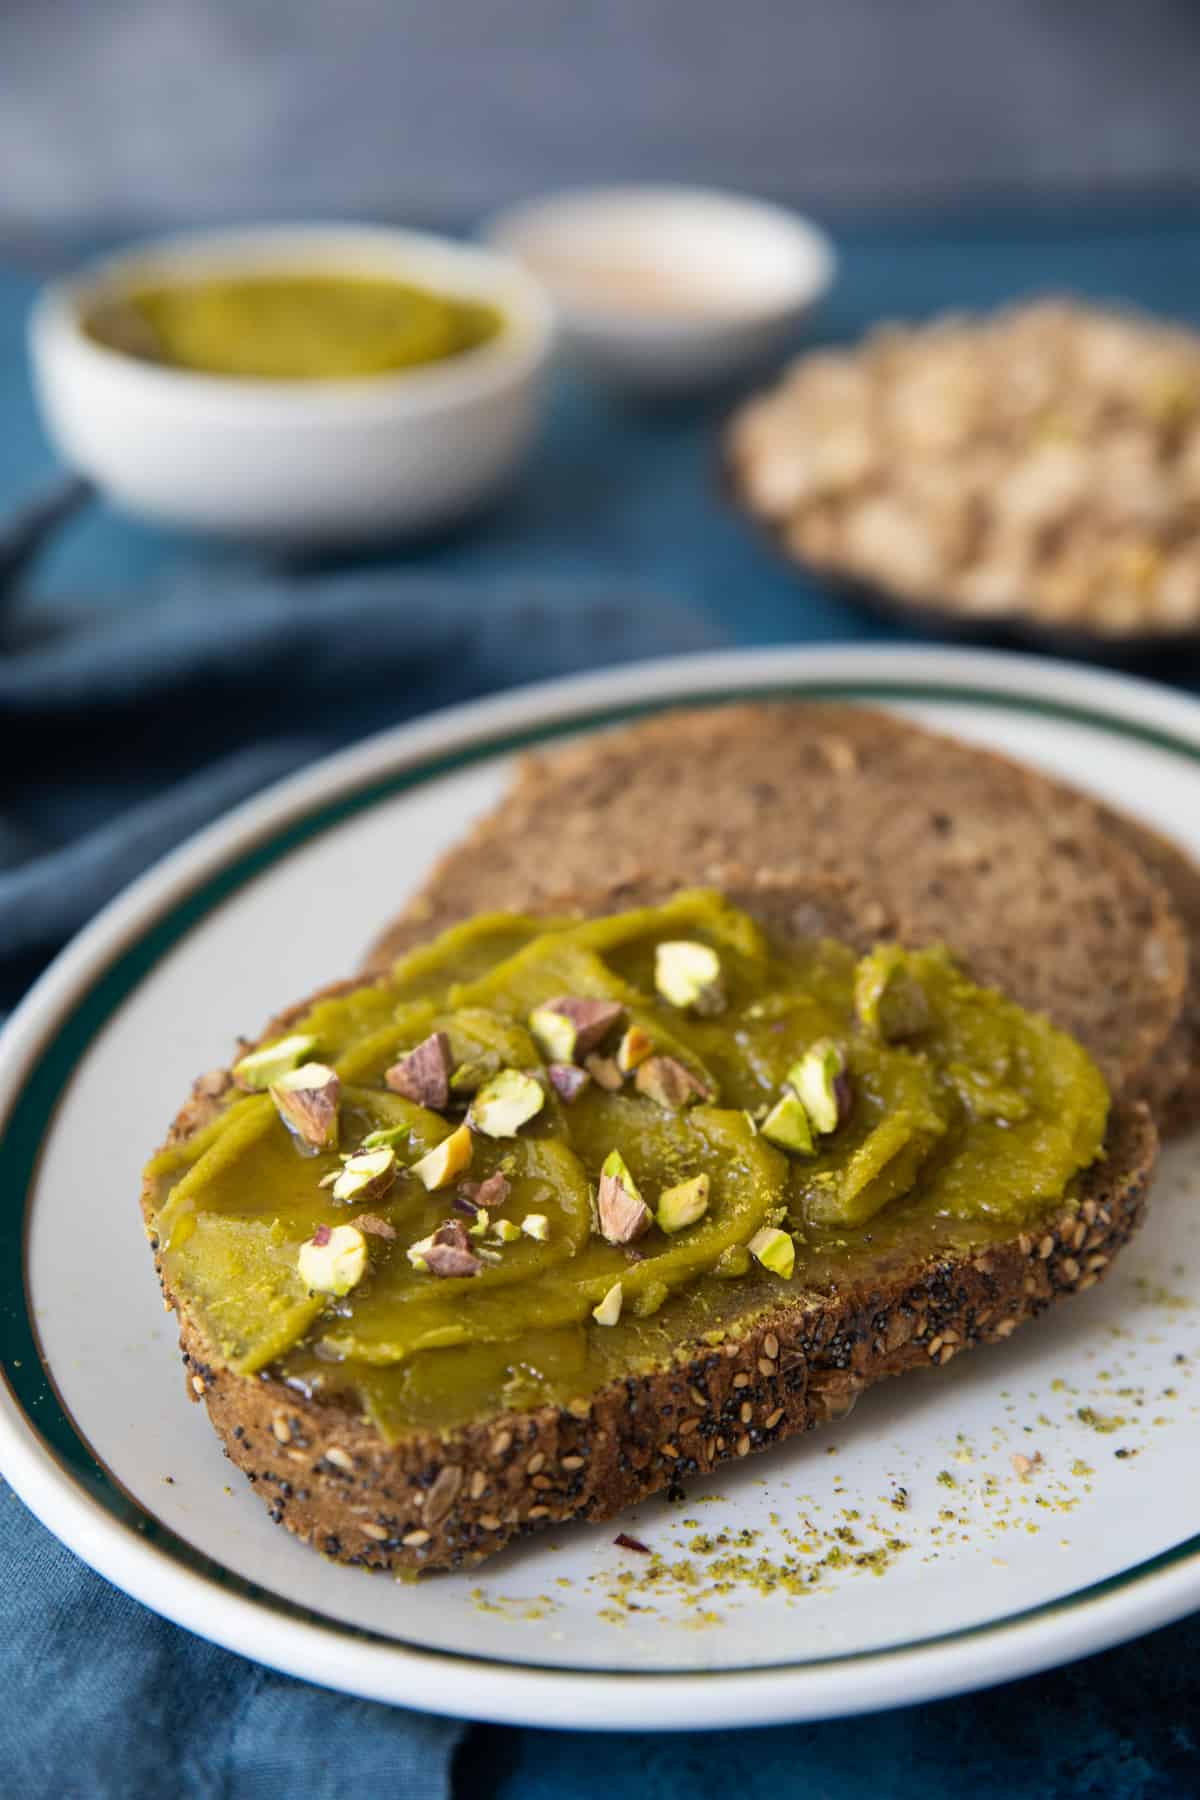 Spread pistachio butter on toasted bread. 